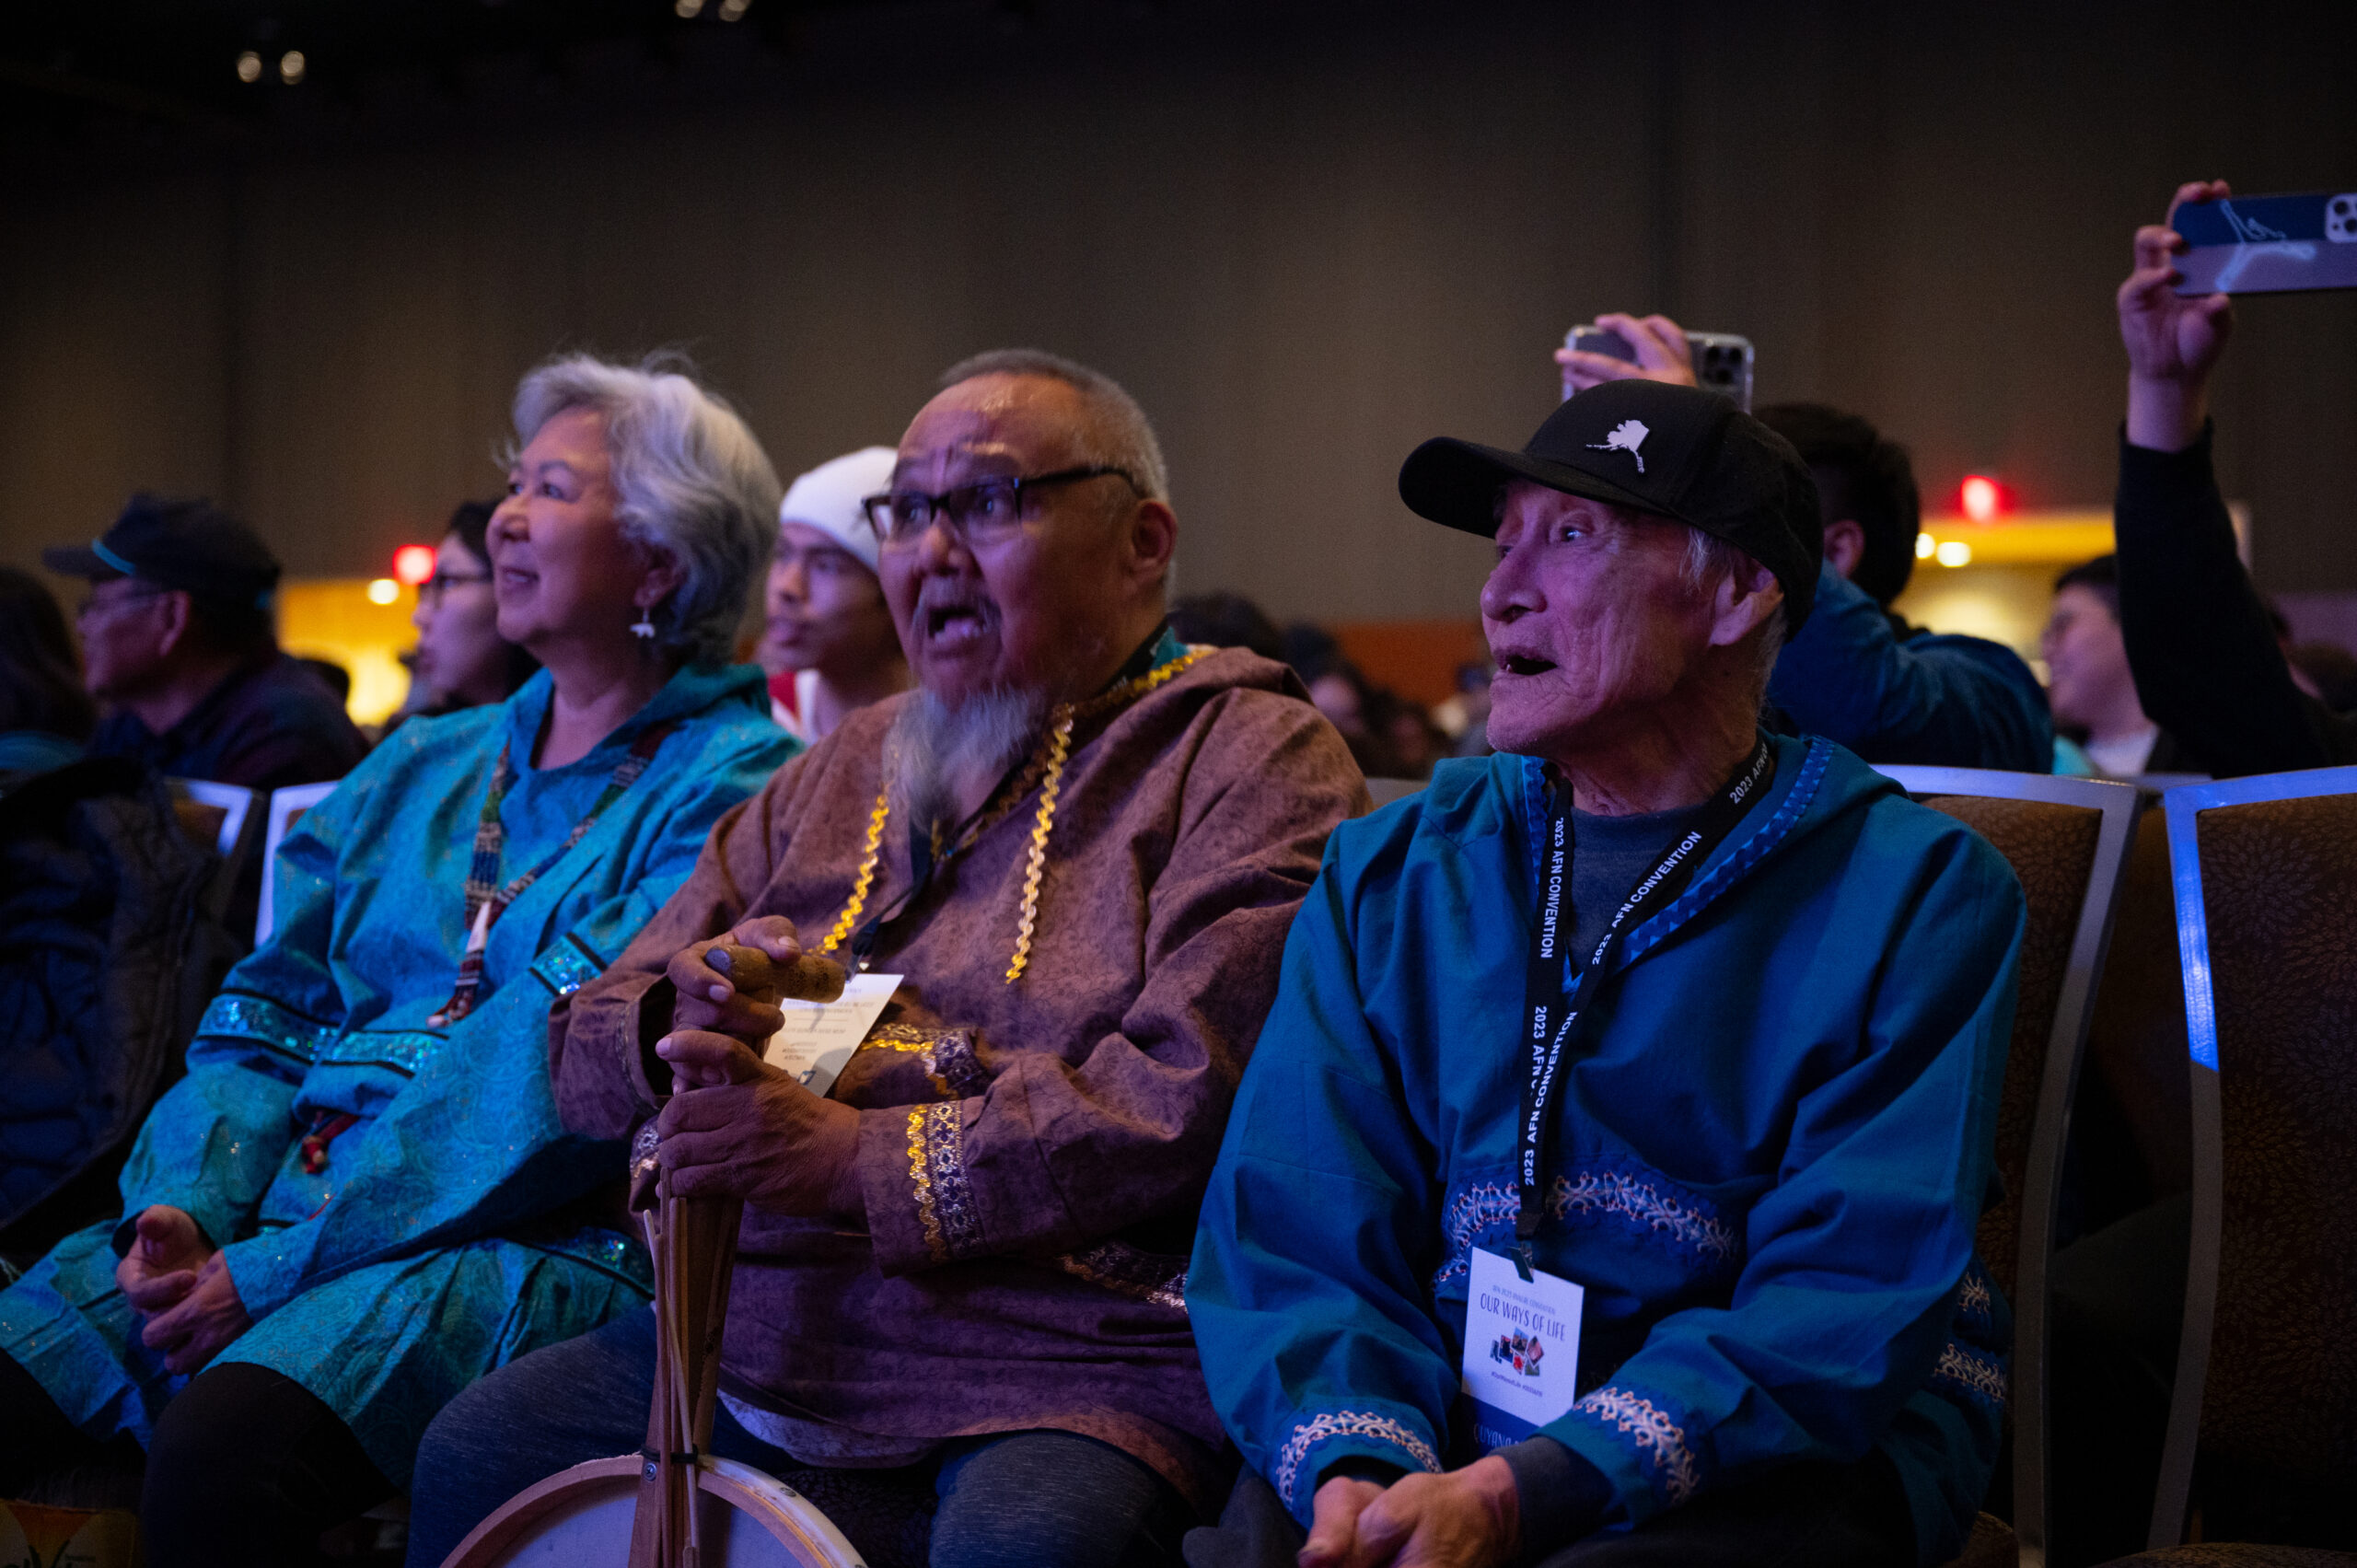 A group of elders singing along to a show.